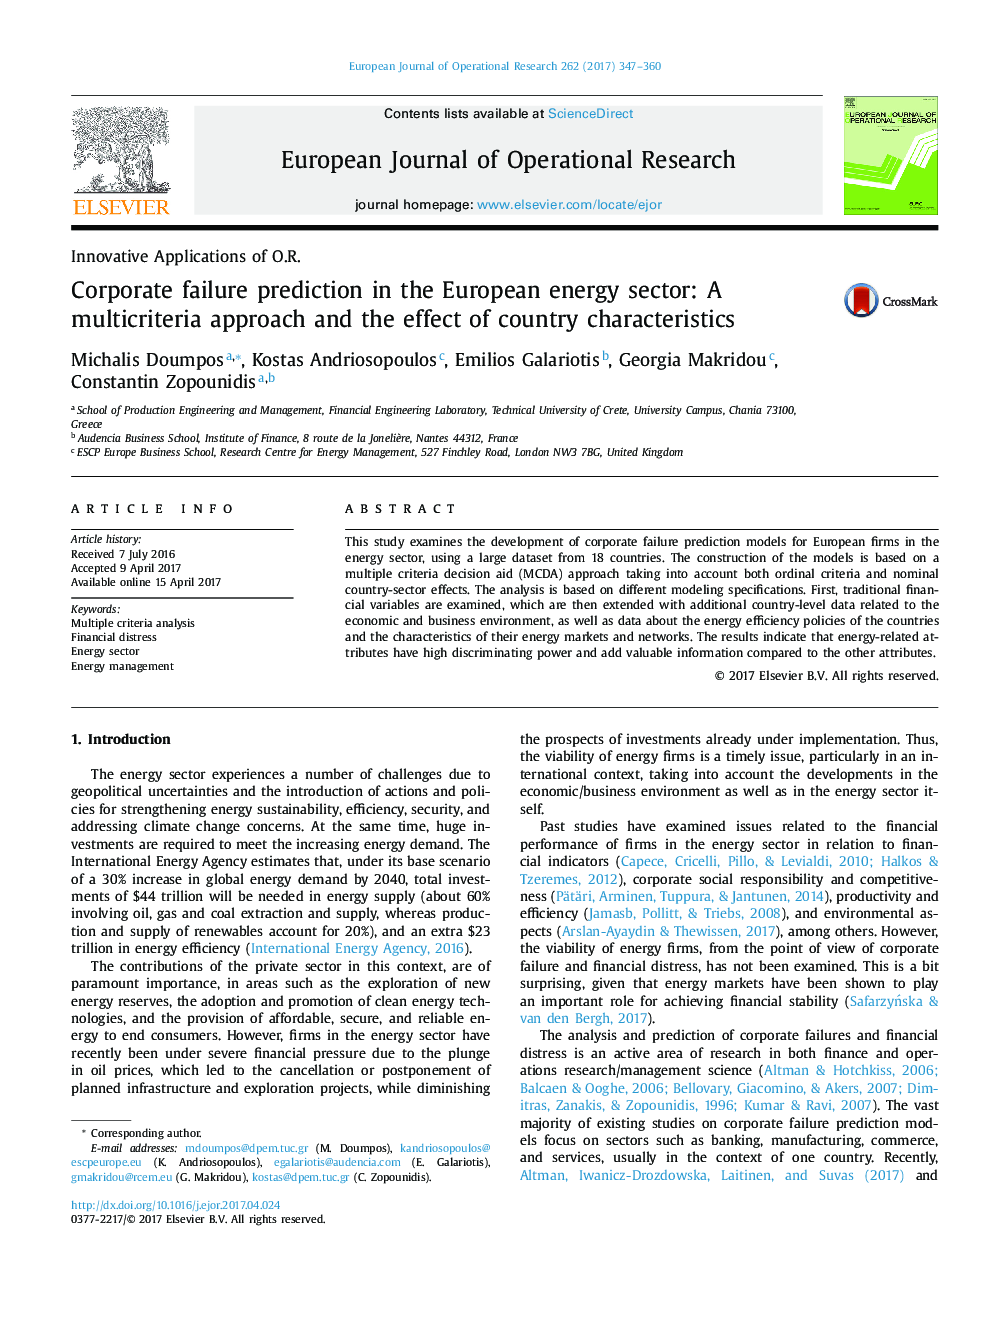 Innovative Applications of O.R.Corporate failure prediction in the European energy sector: A multicriteria approach and the effect of country characteristics